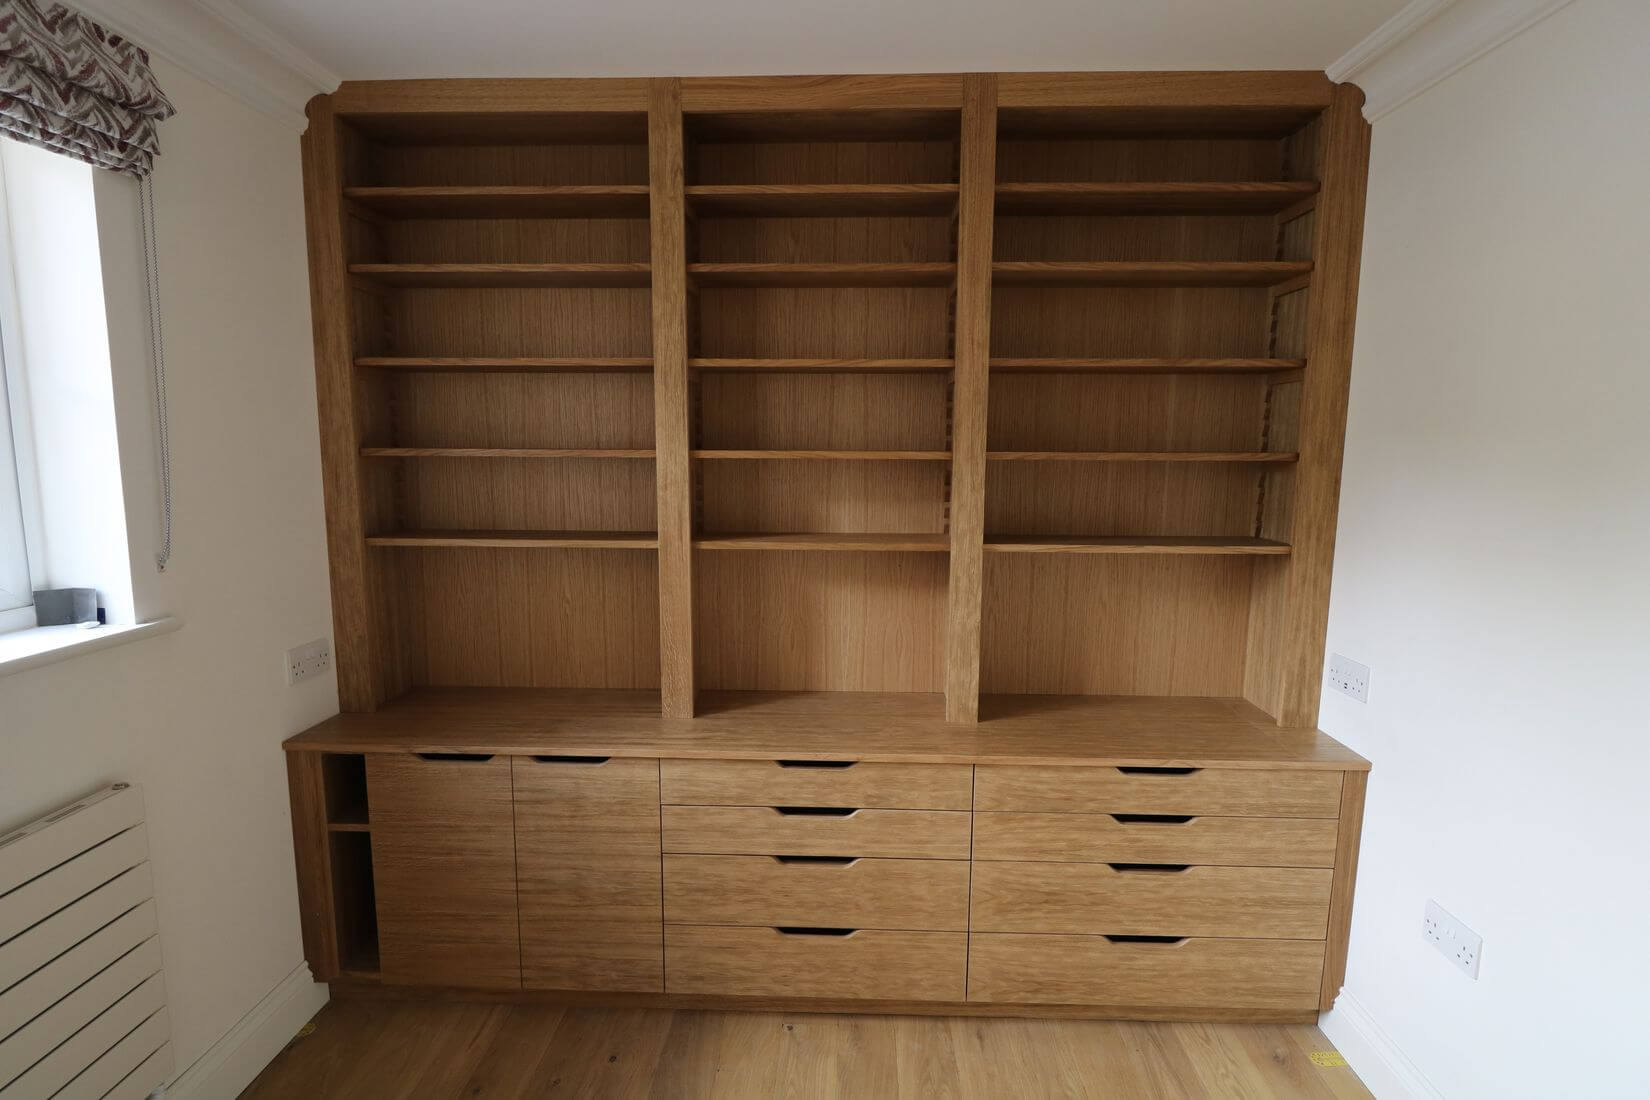 Full height wooden storage unit